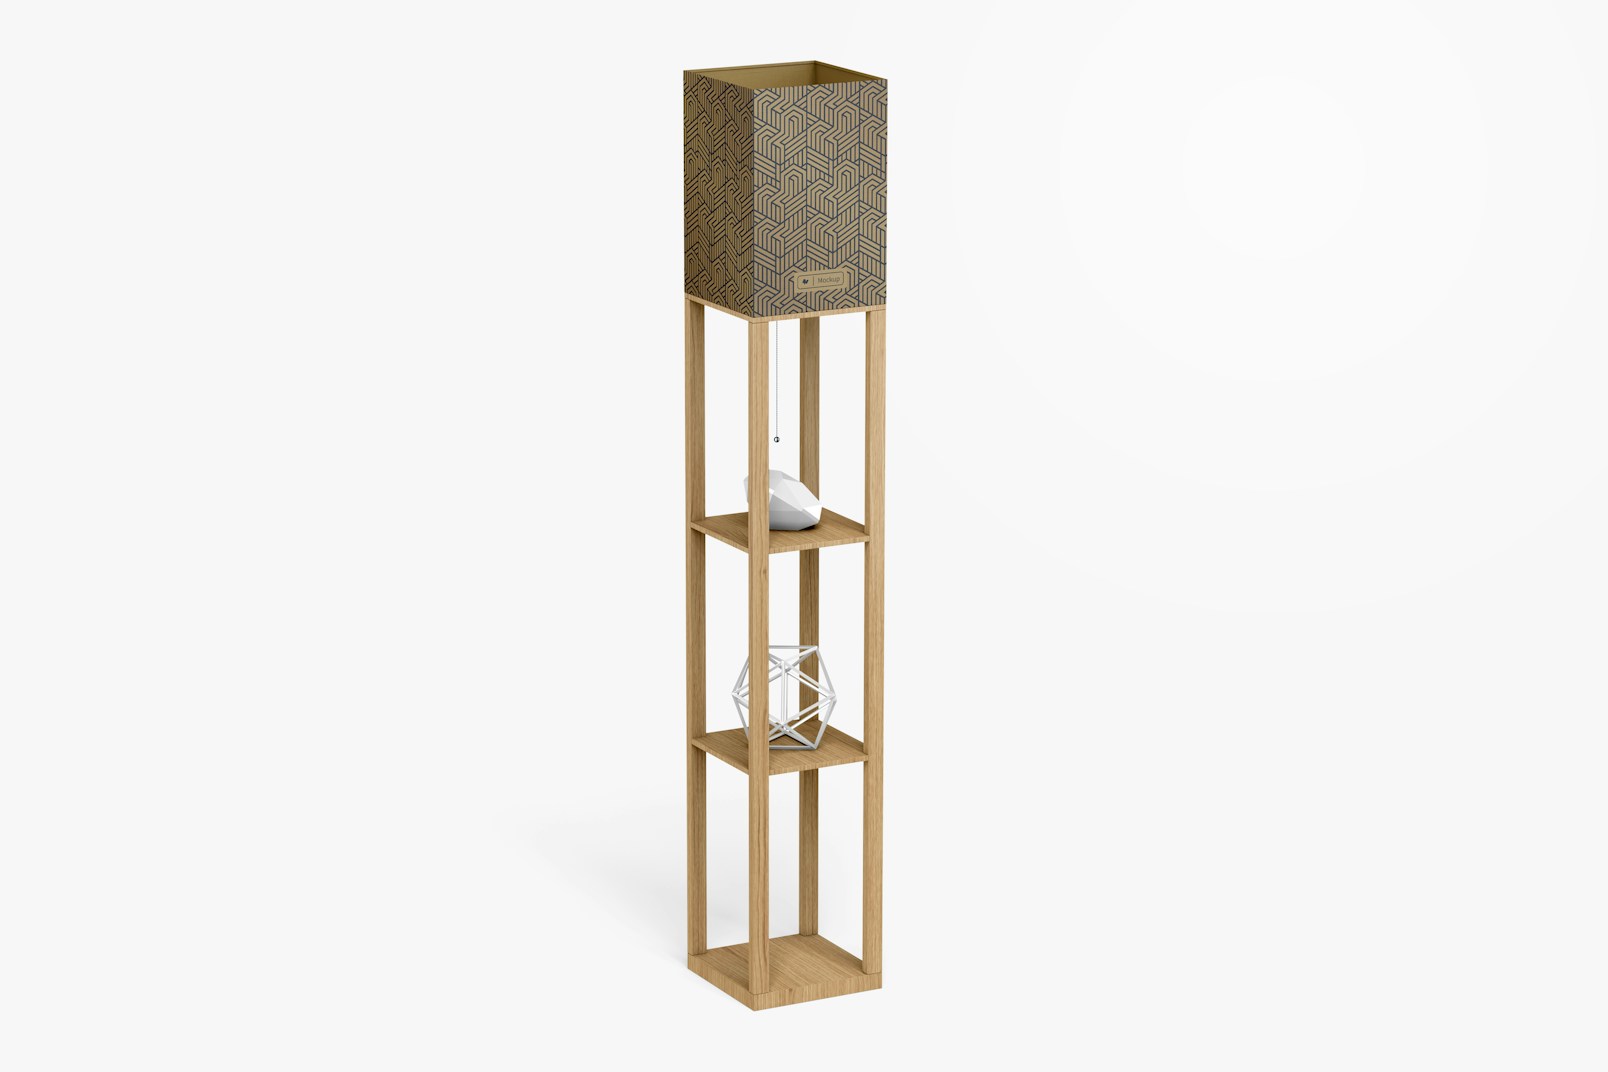 Floor Lamp with Wooden Shelves Mockup, Perspective